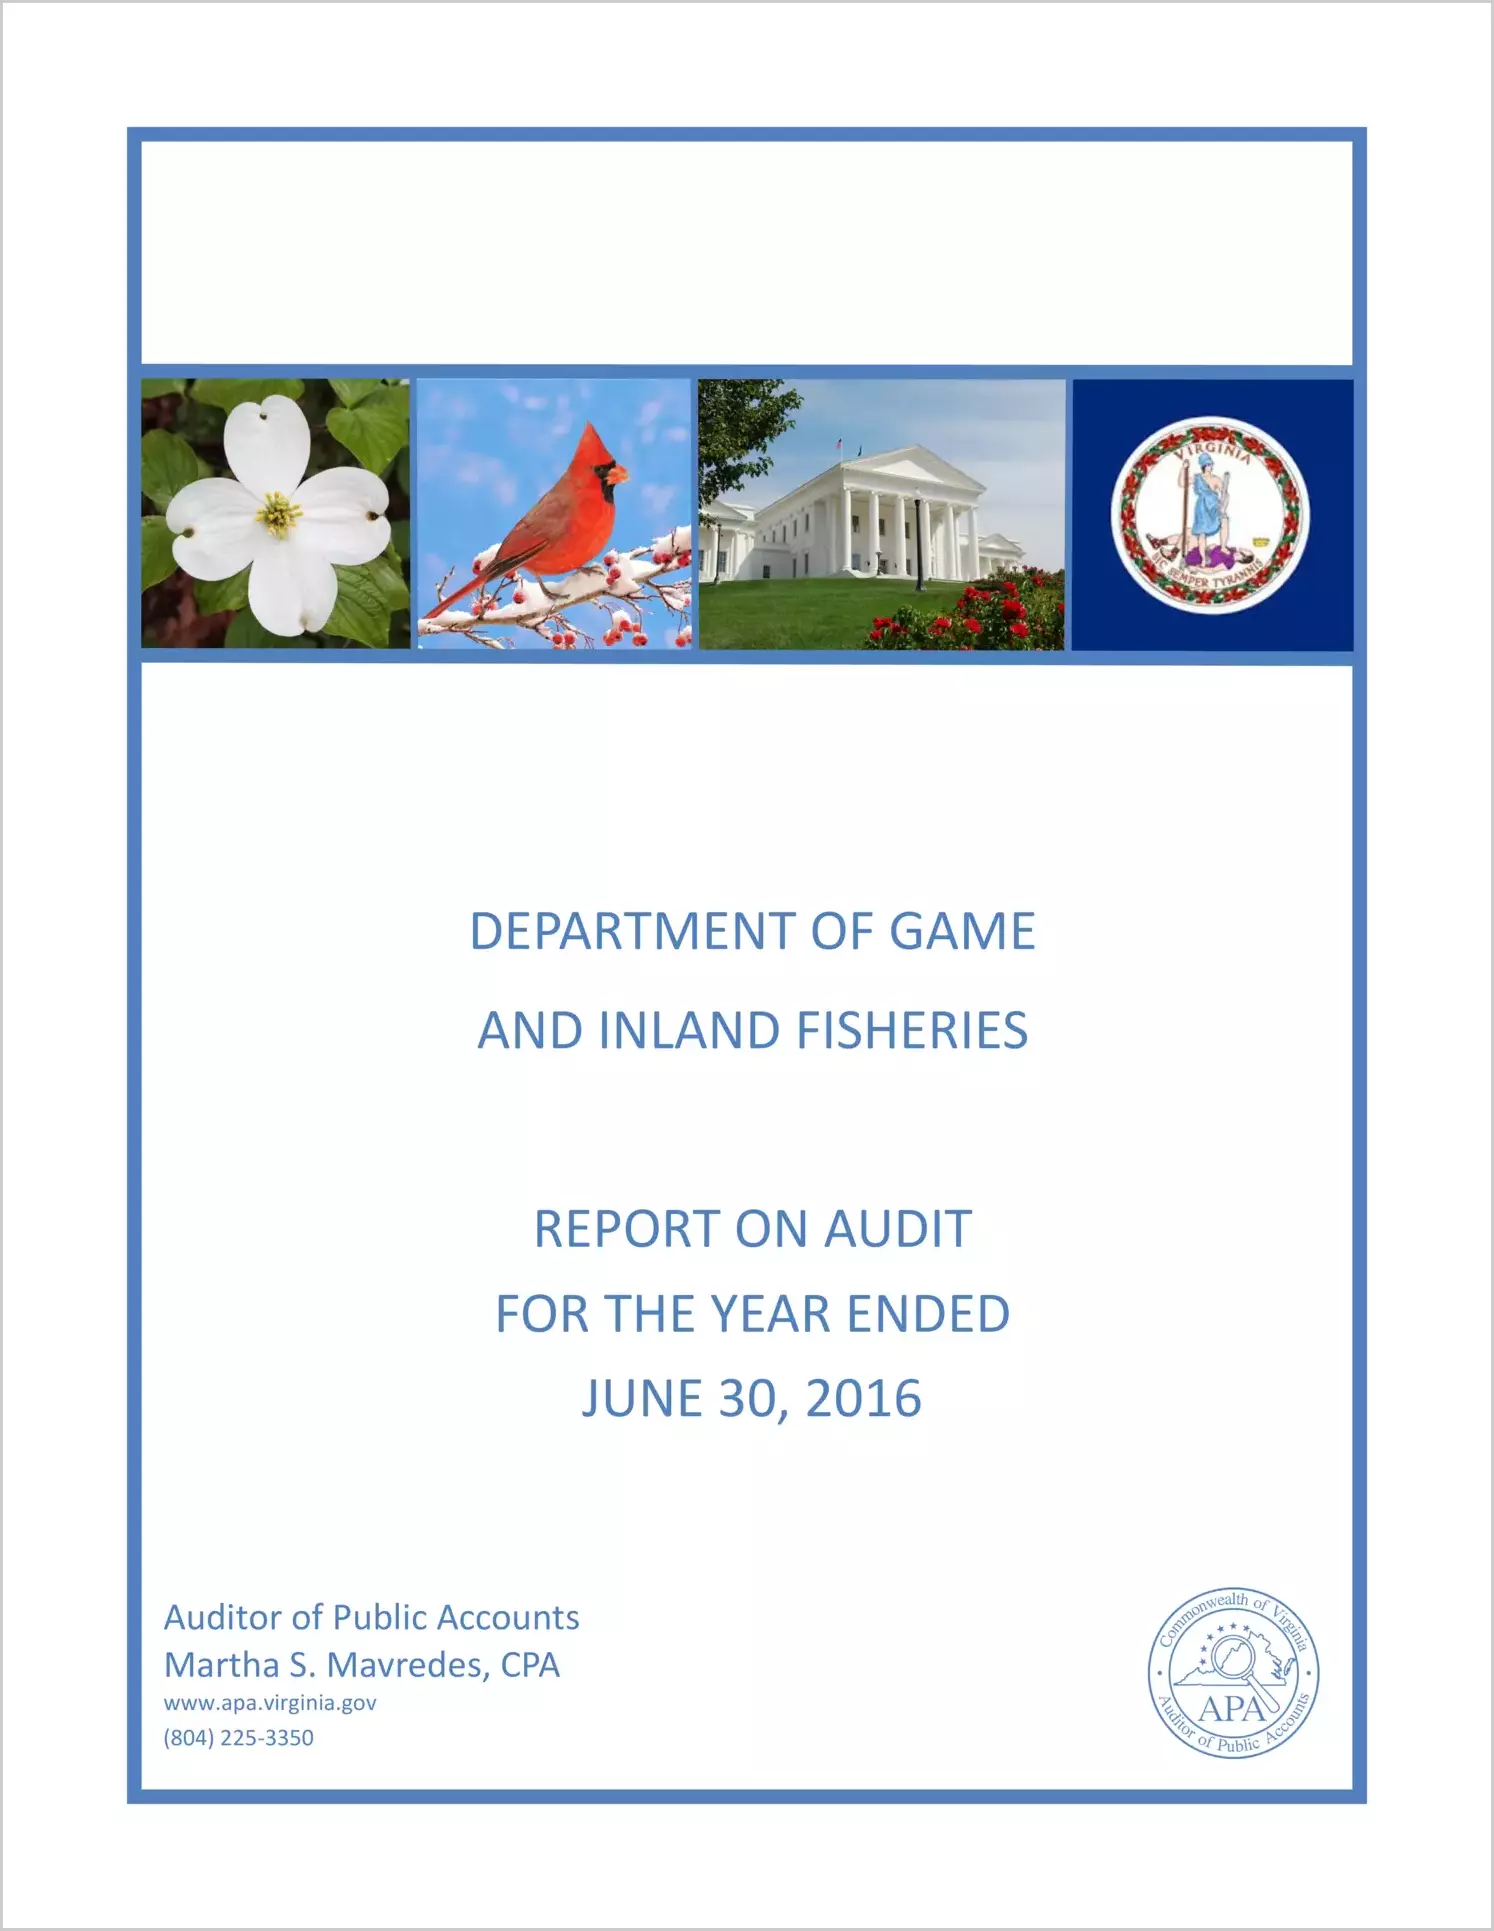 Department of Game and Inland Fisheries for the year ended June 30, 2016